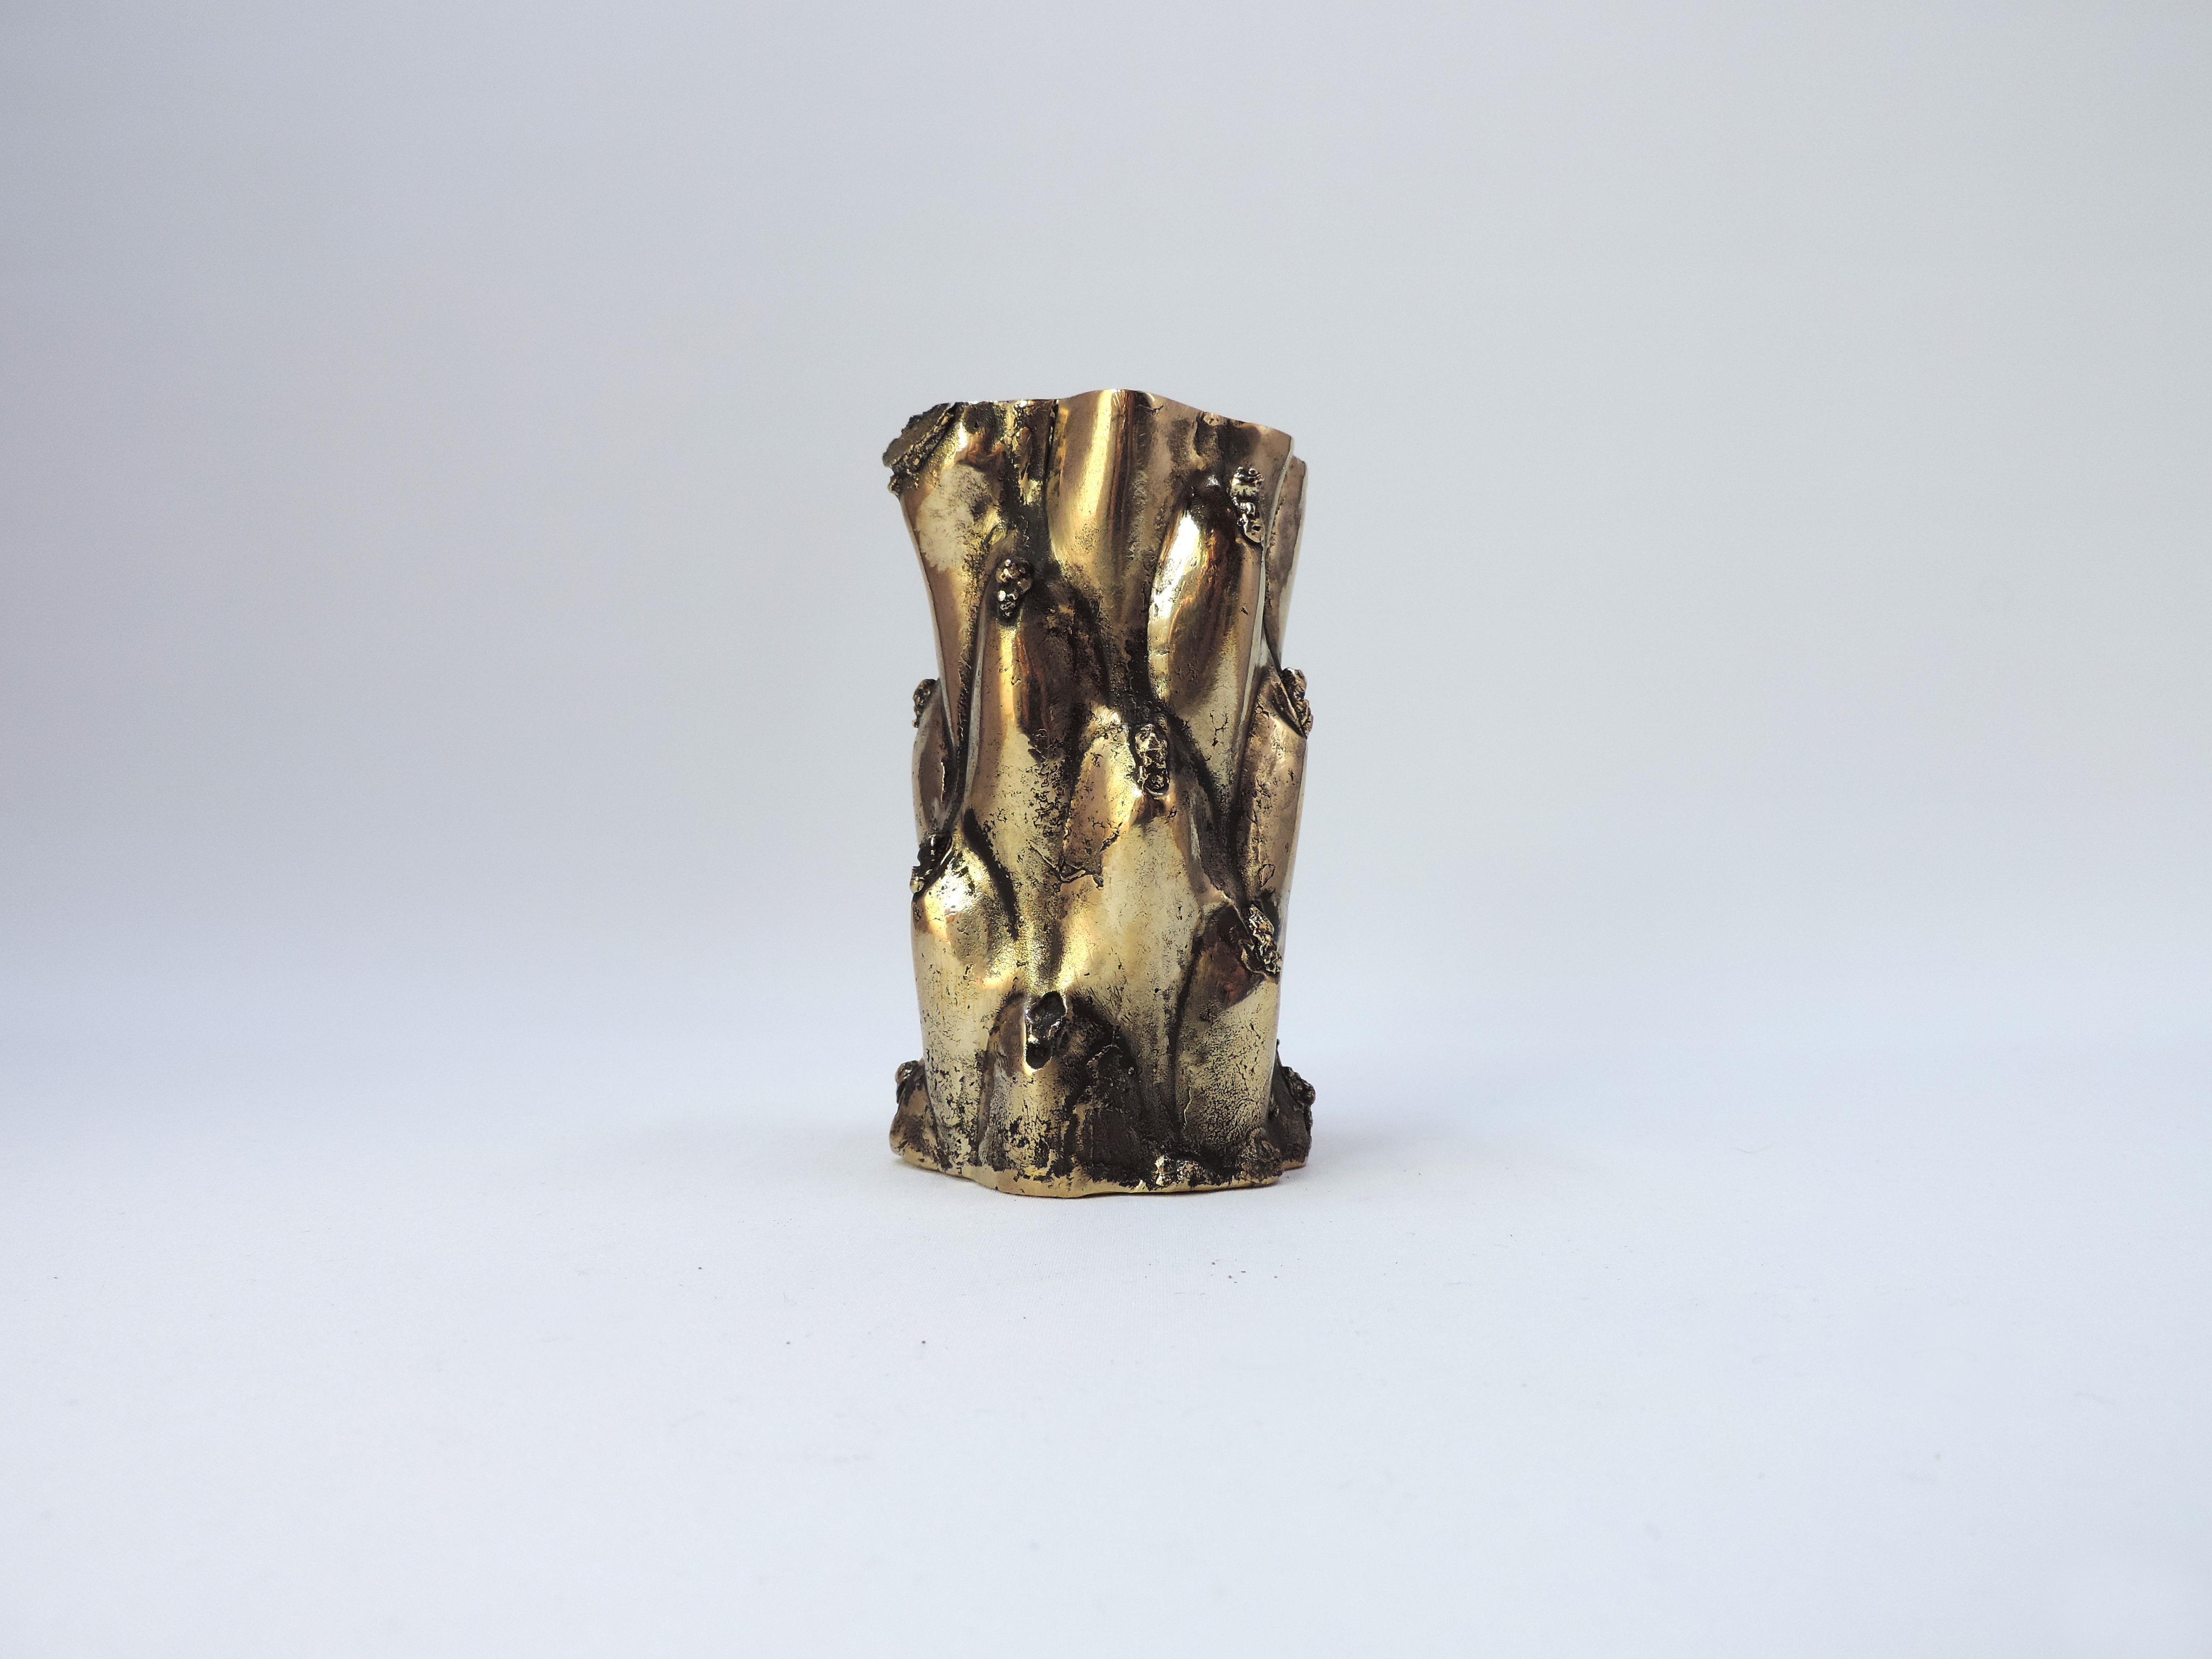 Cactus Vase made in polished bronze by the french designer Fabien Barrero - Carsenat. A certificate of authenticity is issued by the gallery. 

Dimensions: D 2.1